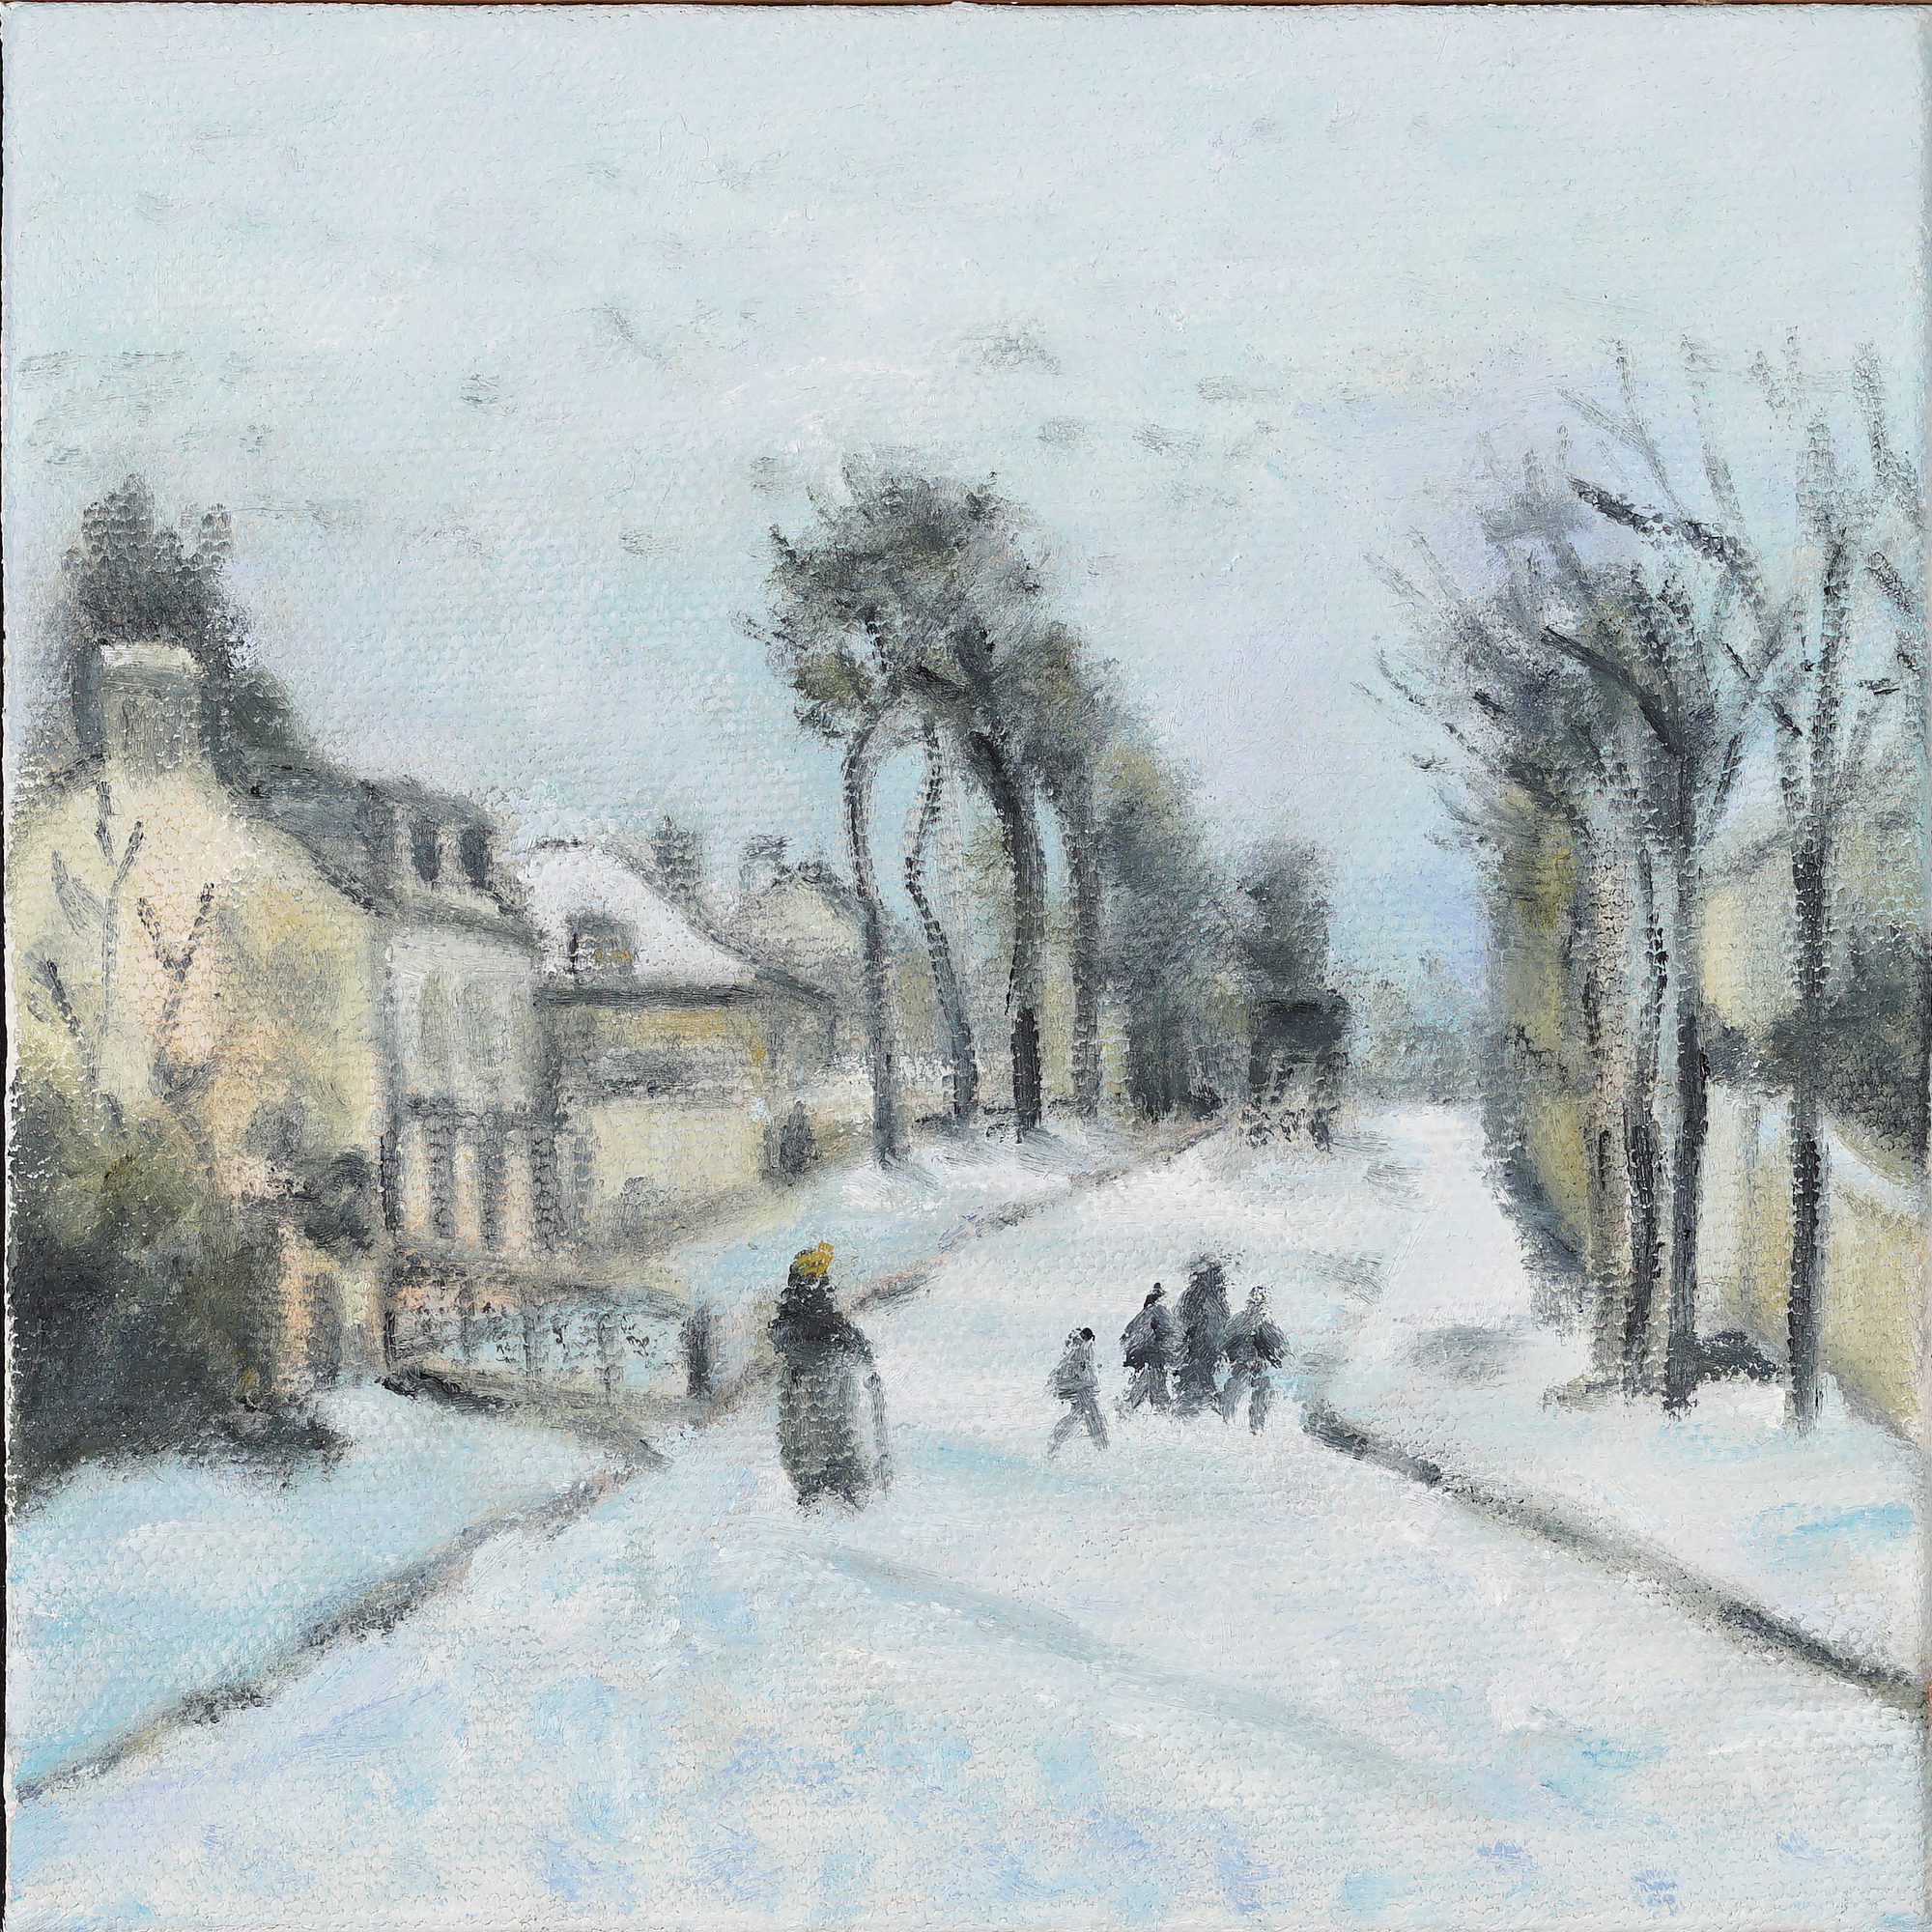 Cindy Sugg, The Road to Versailles at Louveciennes, after Camille Pissarro